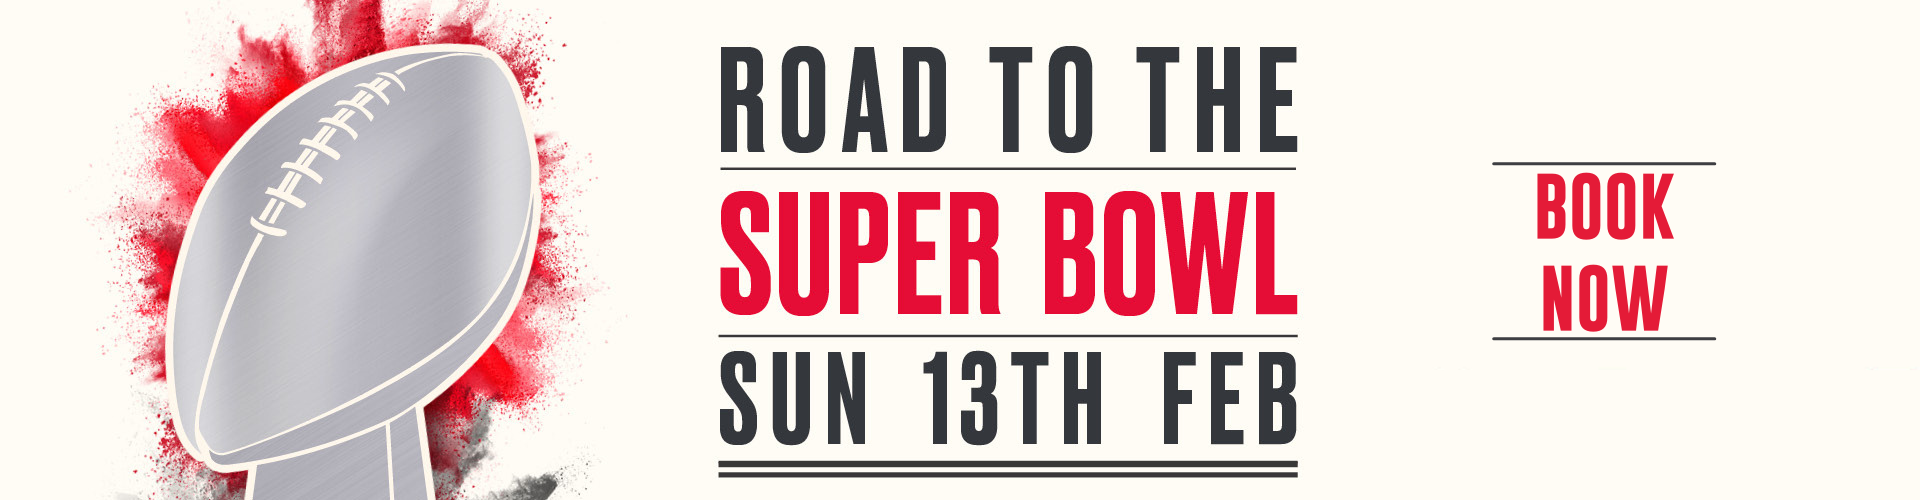 Road To The Super Bowl - Sunday 13th Feb